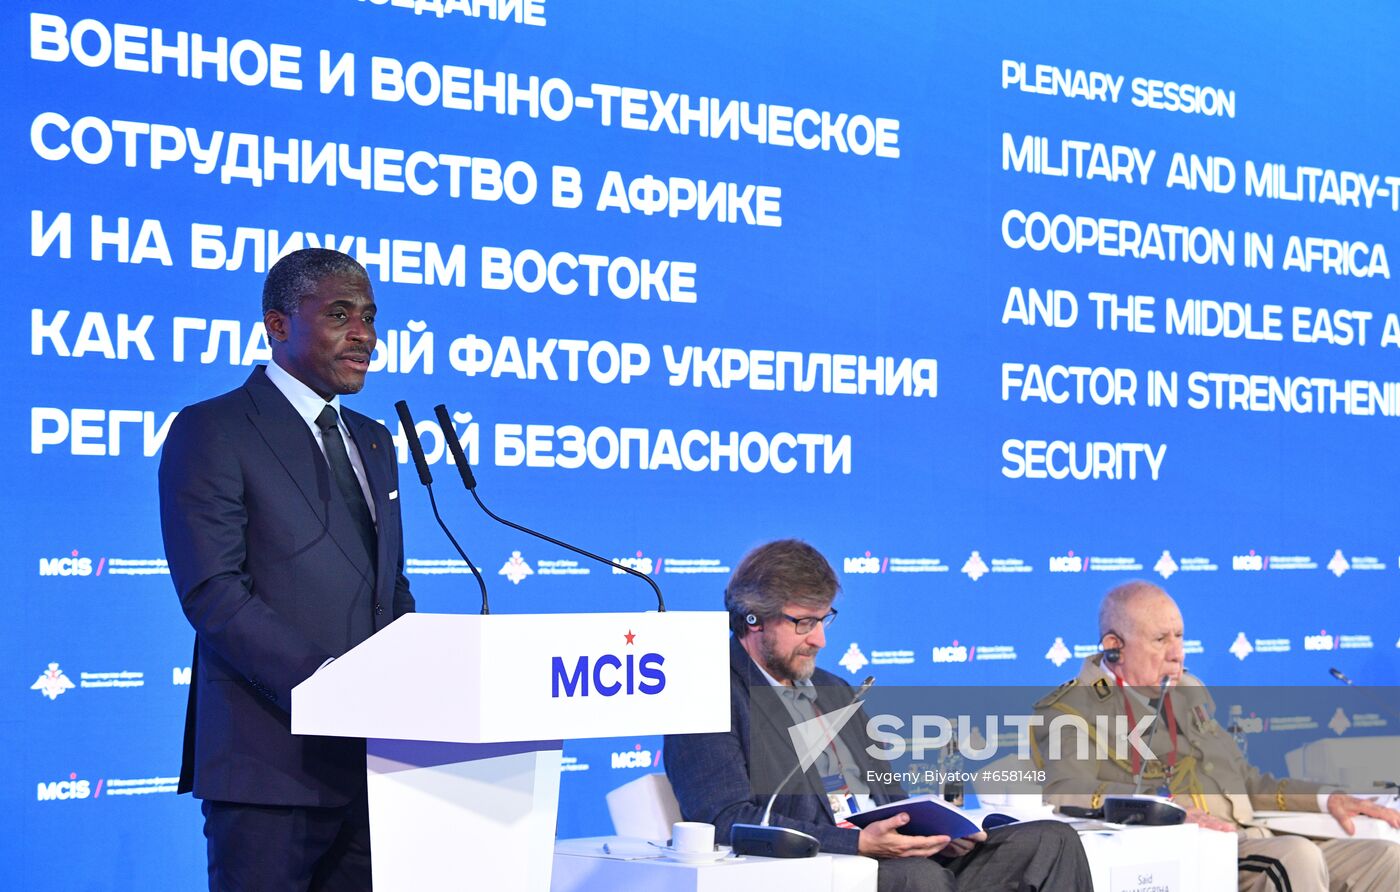 Russia International Security Conference